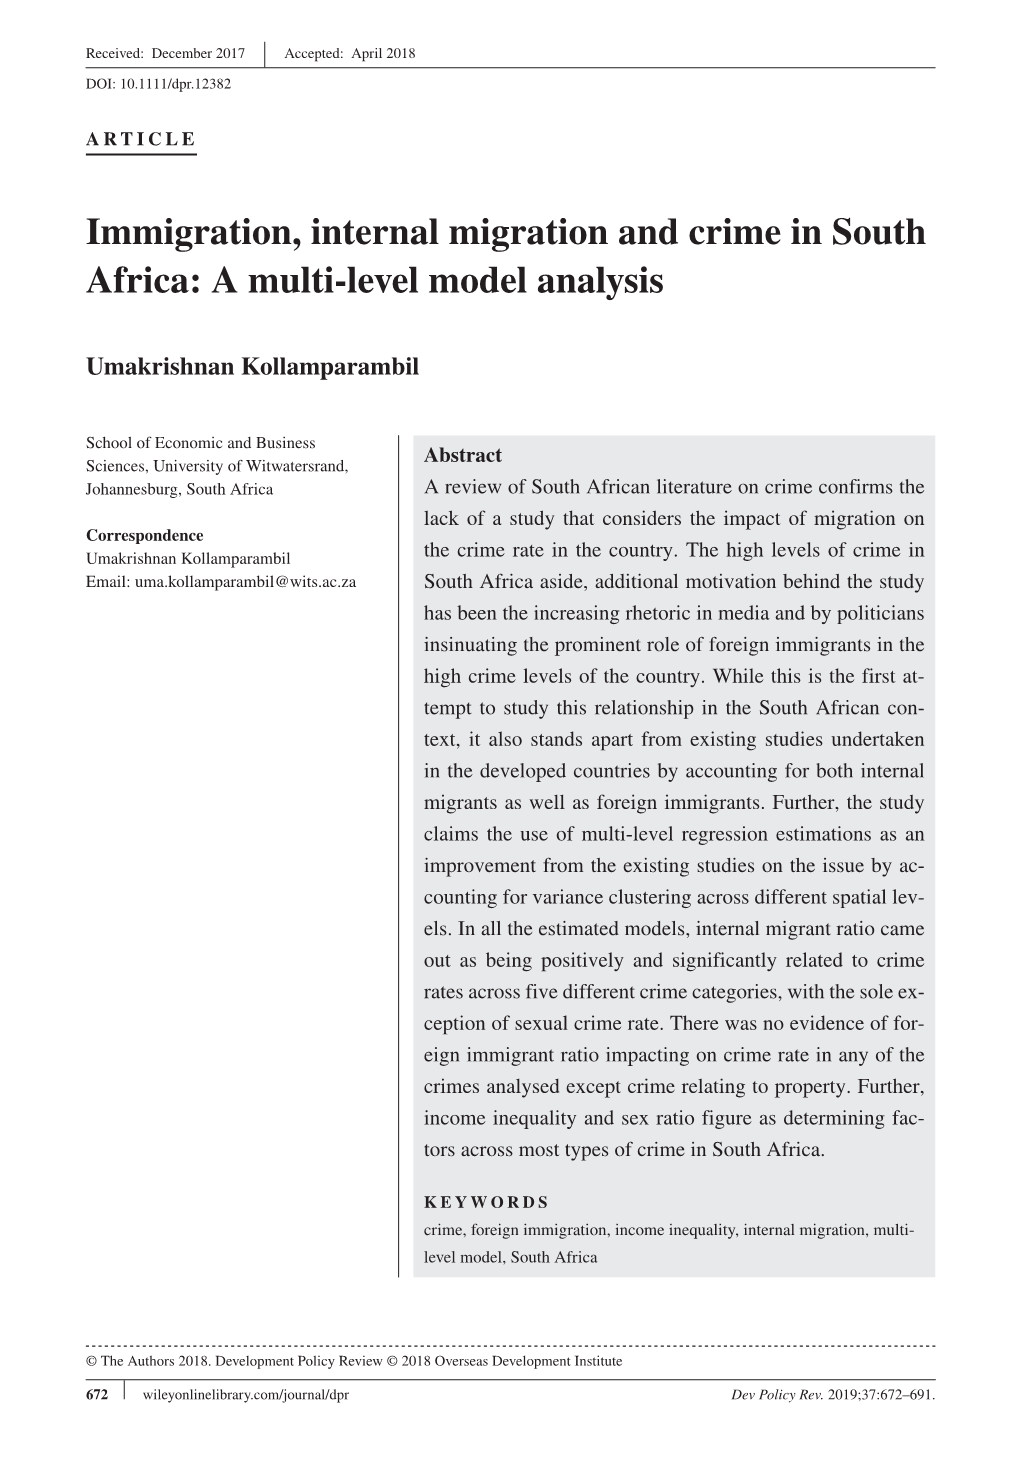 Immigration, Internal Migration and Crime in South Africa: a Multi‐Level Model Analysis